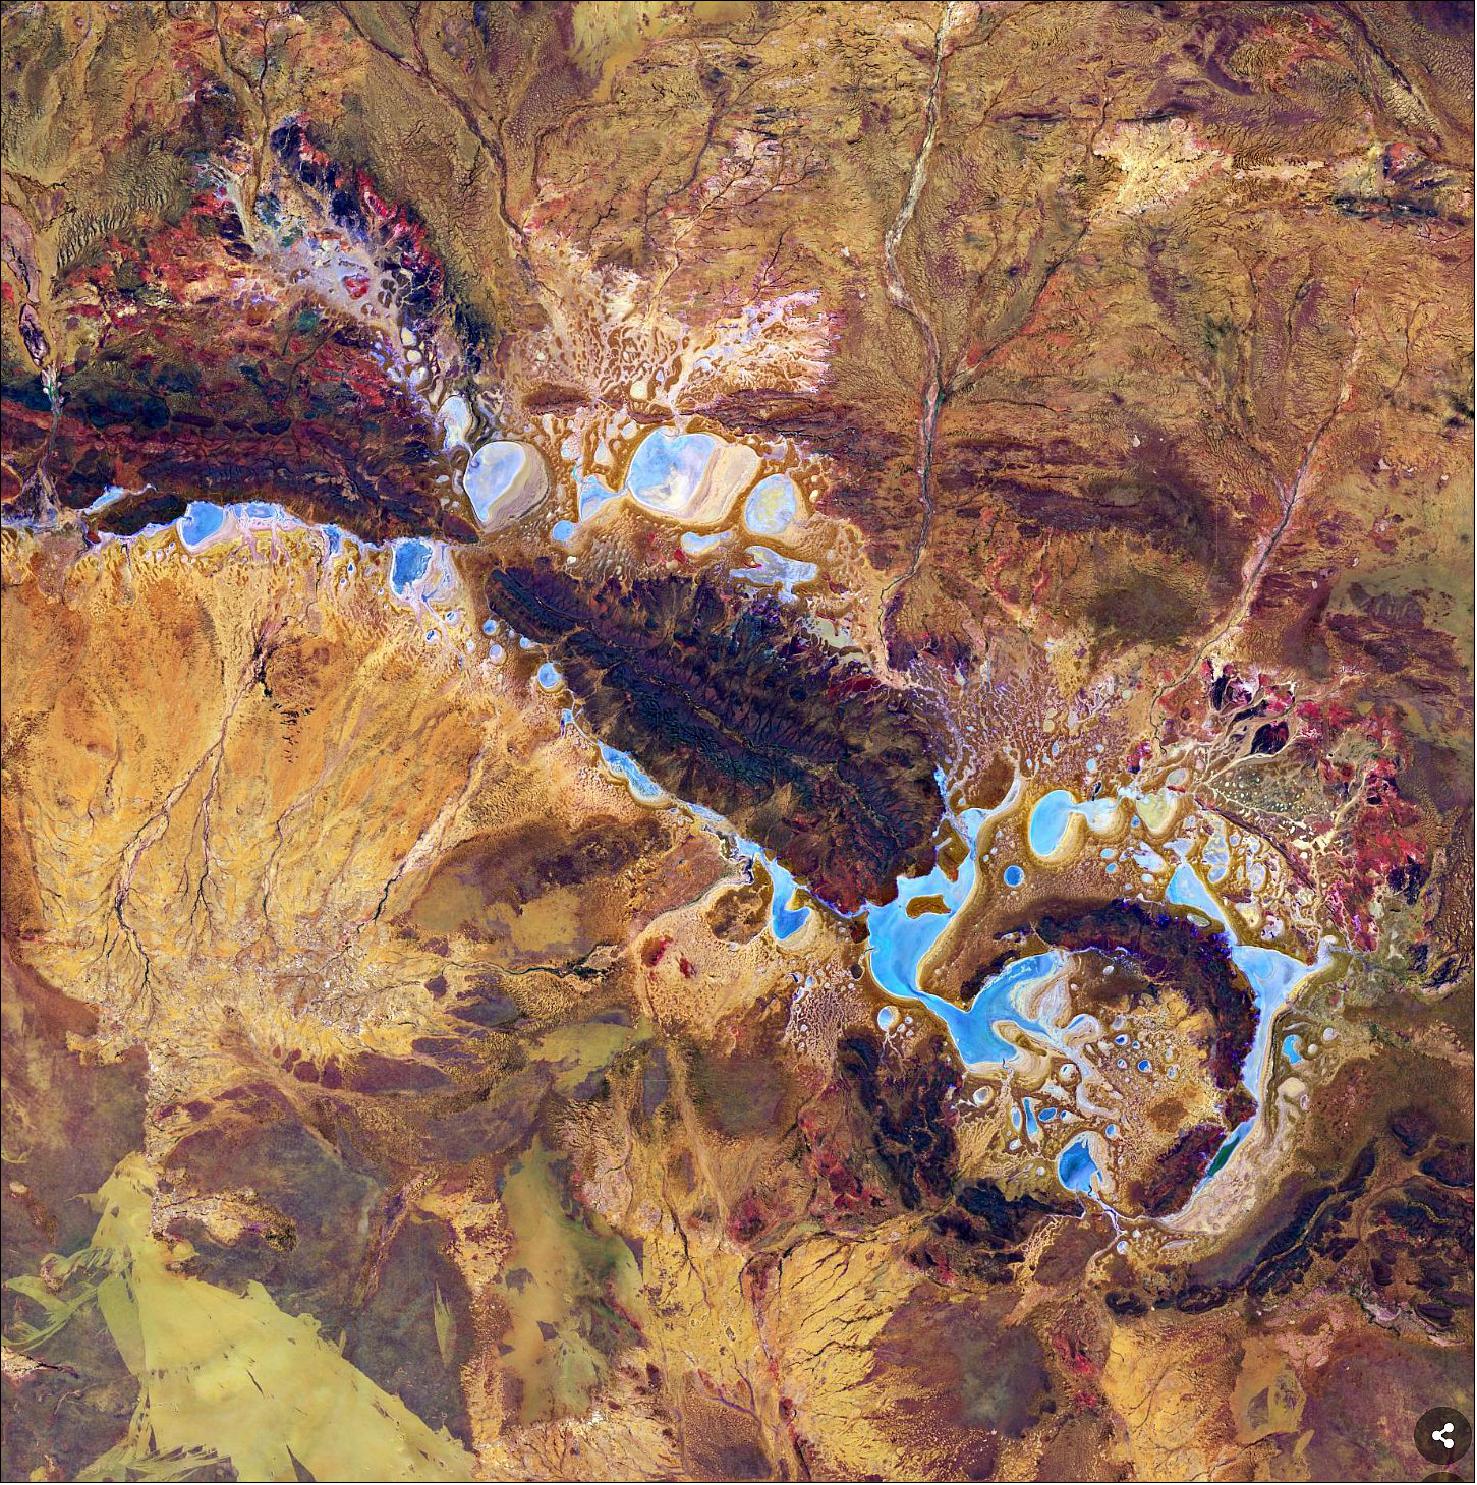 Figure 35: Located around 100 km northeast of the small town Wiluna, the Shoemaker Impact Structure was renamed in honor of Eugene Shoemaker, a planetary geologist and pioneer in impact crater studies. This false-color image was processed by selecting spectral bands that can be used for classifying geological features, allowing us to clearly identify the concentric rings in the image. The light blue areas are saline and ephemeral lakes including Nabberu, Teague, Shoemaker and other smaller ponds (image credit: ESA, the image contains modified Copernicus Sentinel data (2021), processed by ESA, CC BY-SA 3.0 IGO)